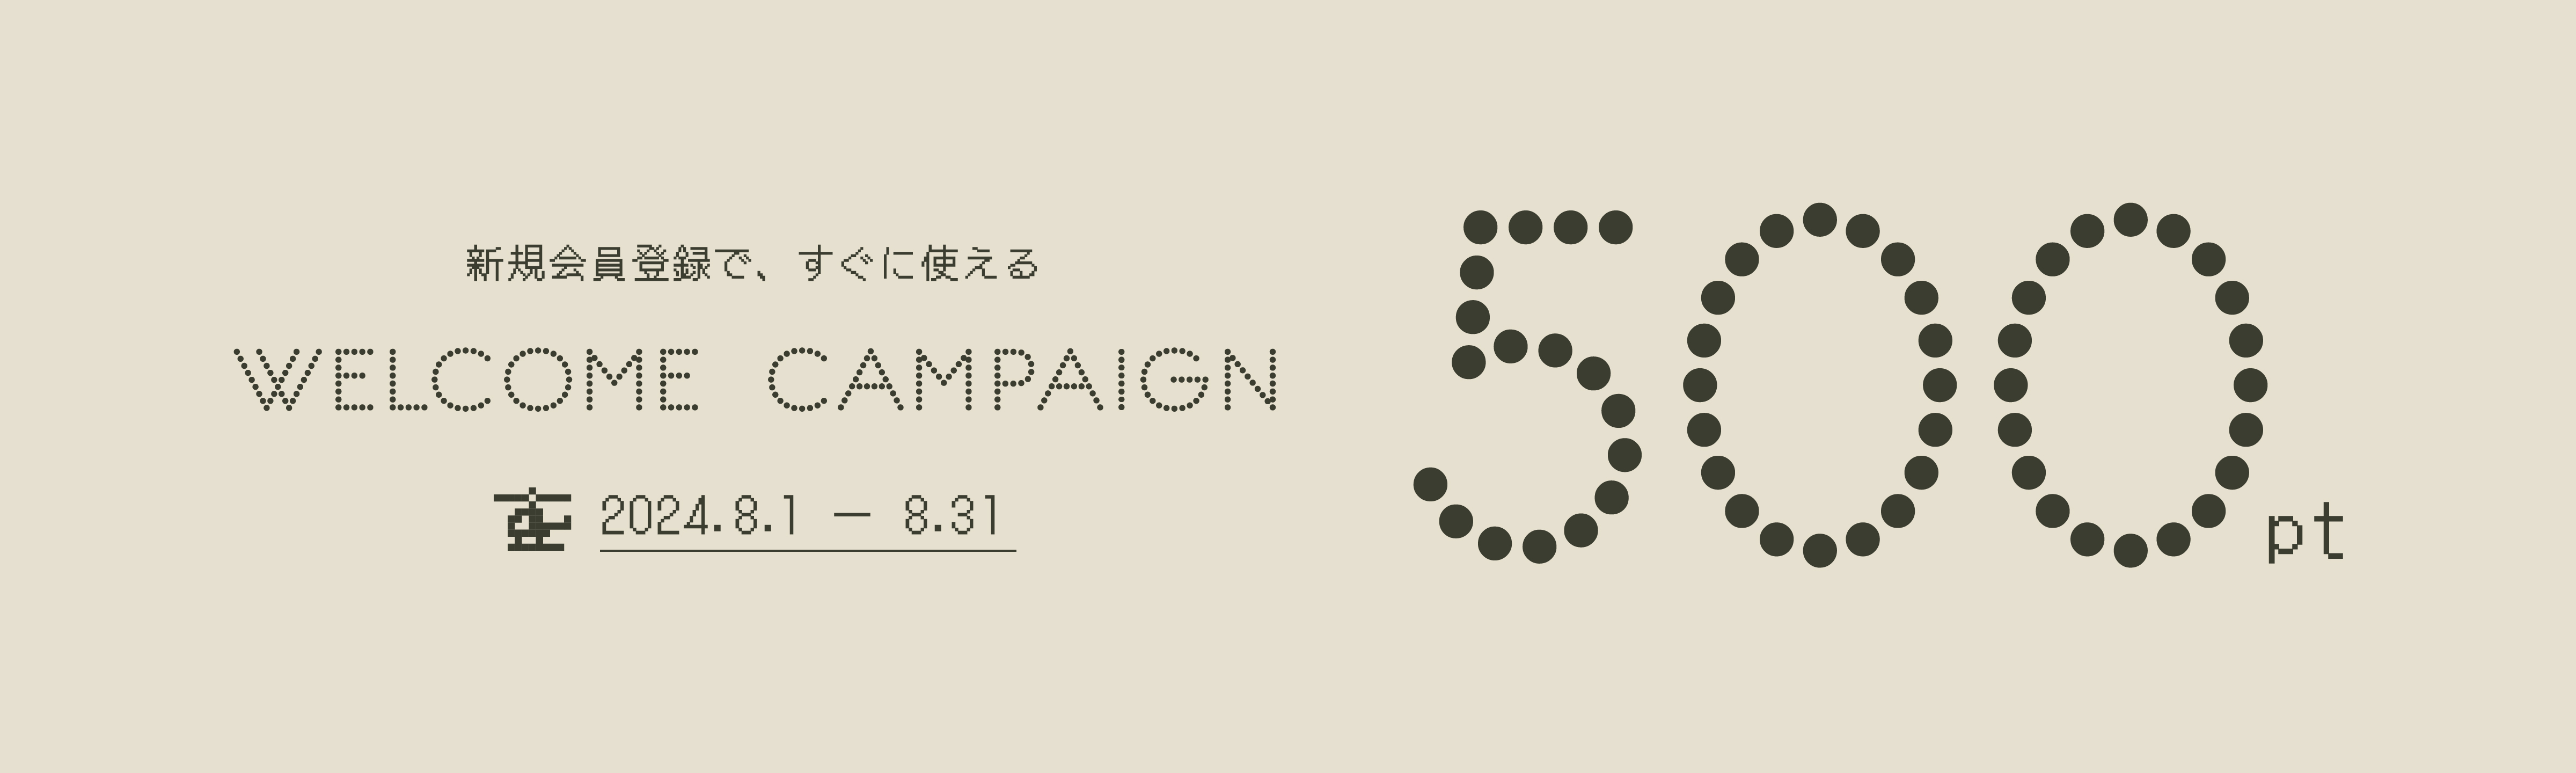 WELCOME CAMPAIGN 新規会員登録で、すぐに使える500pt 2024.8.1 - 8.31